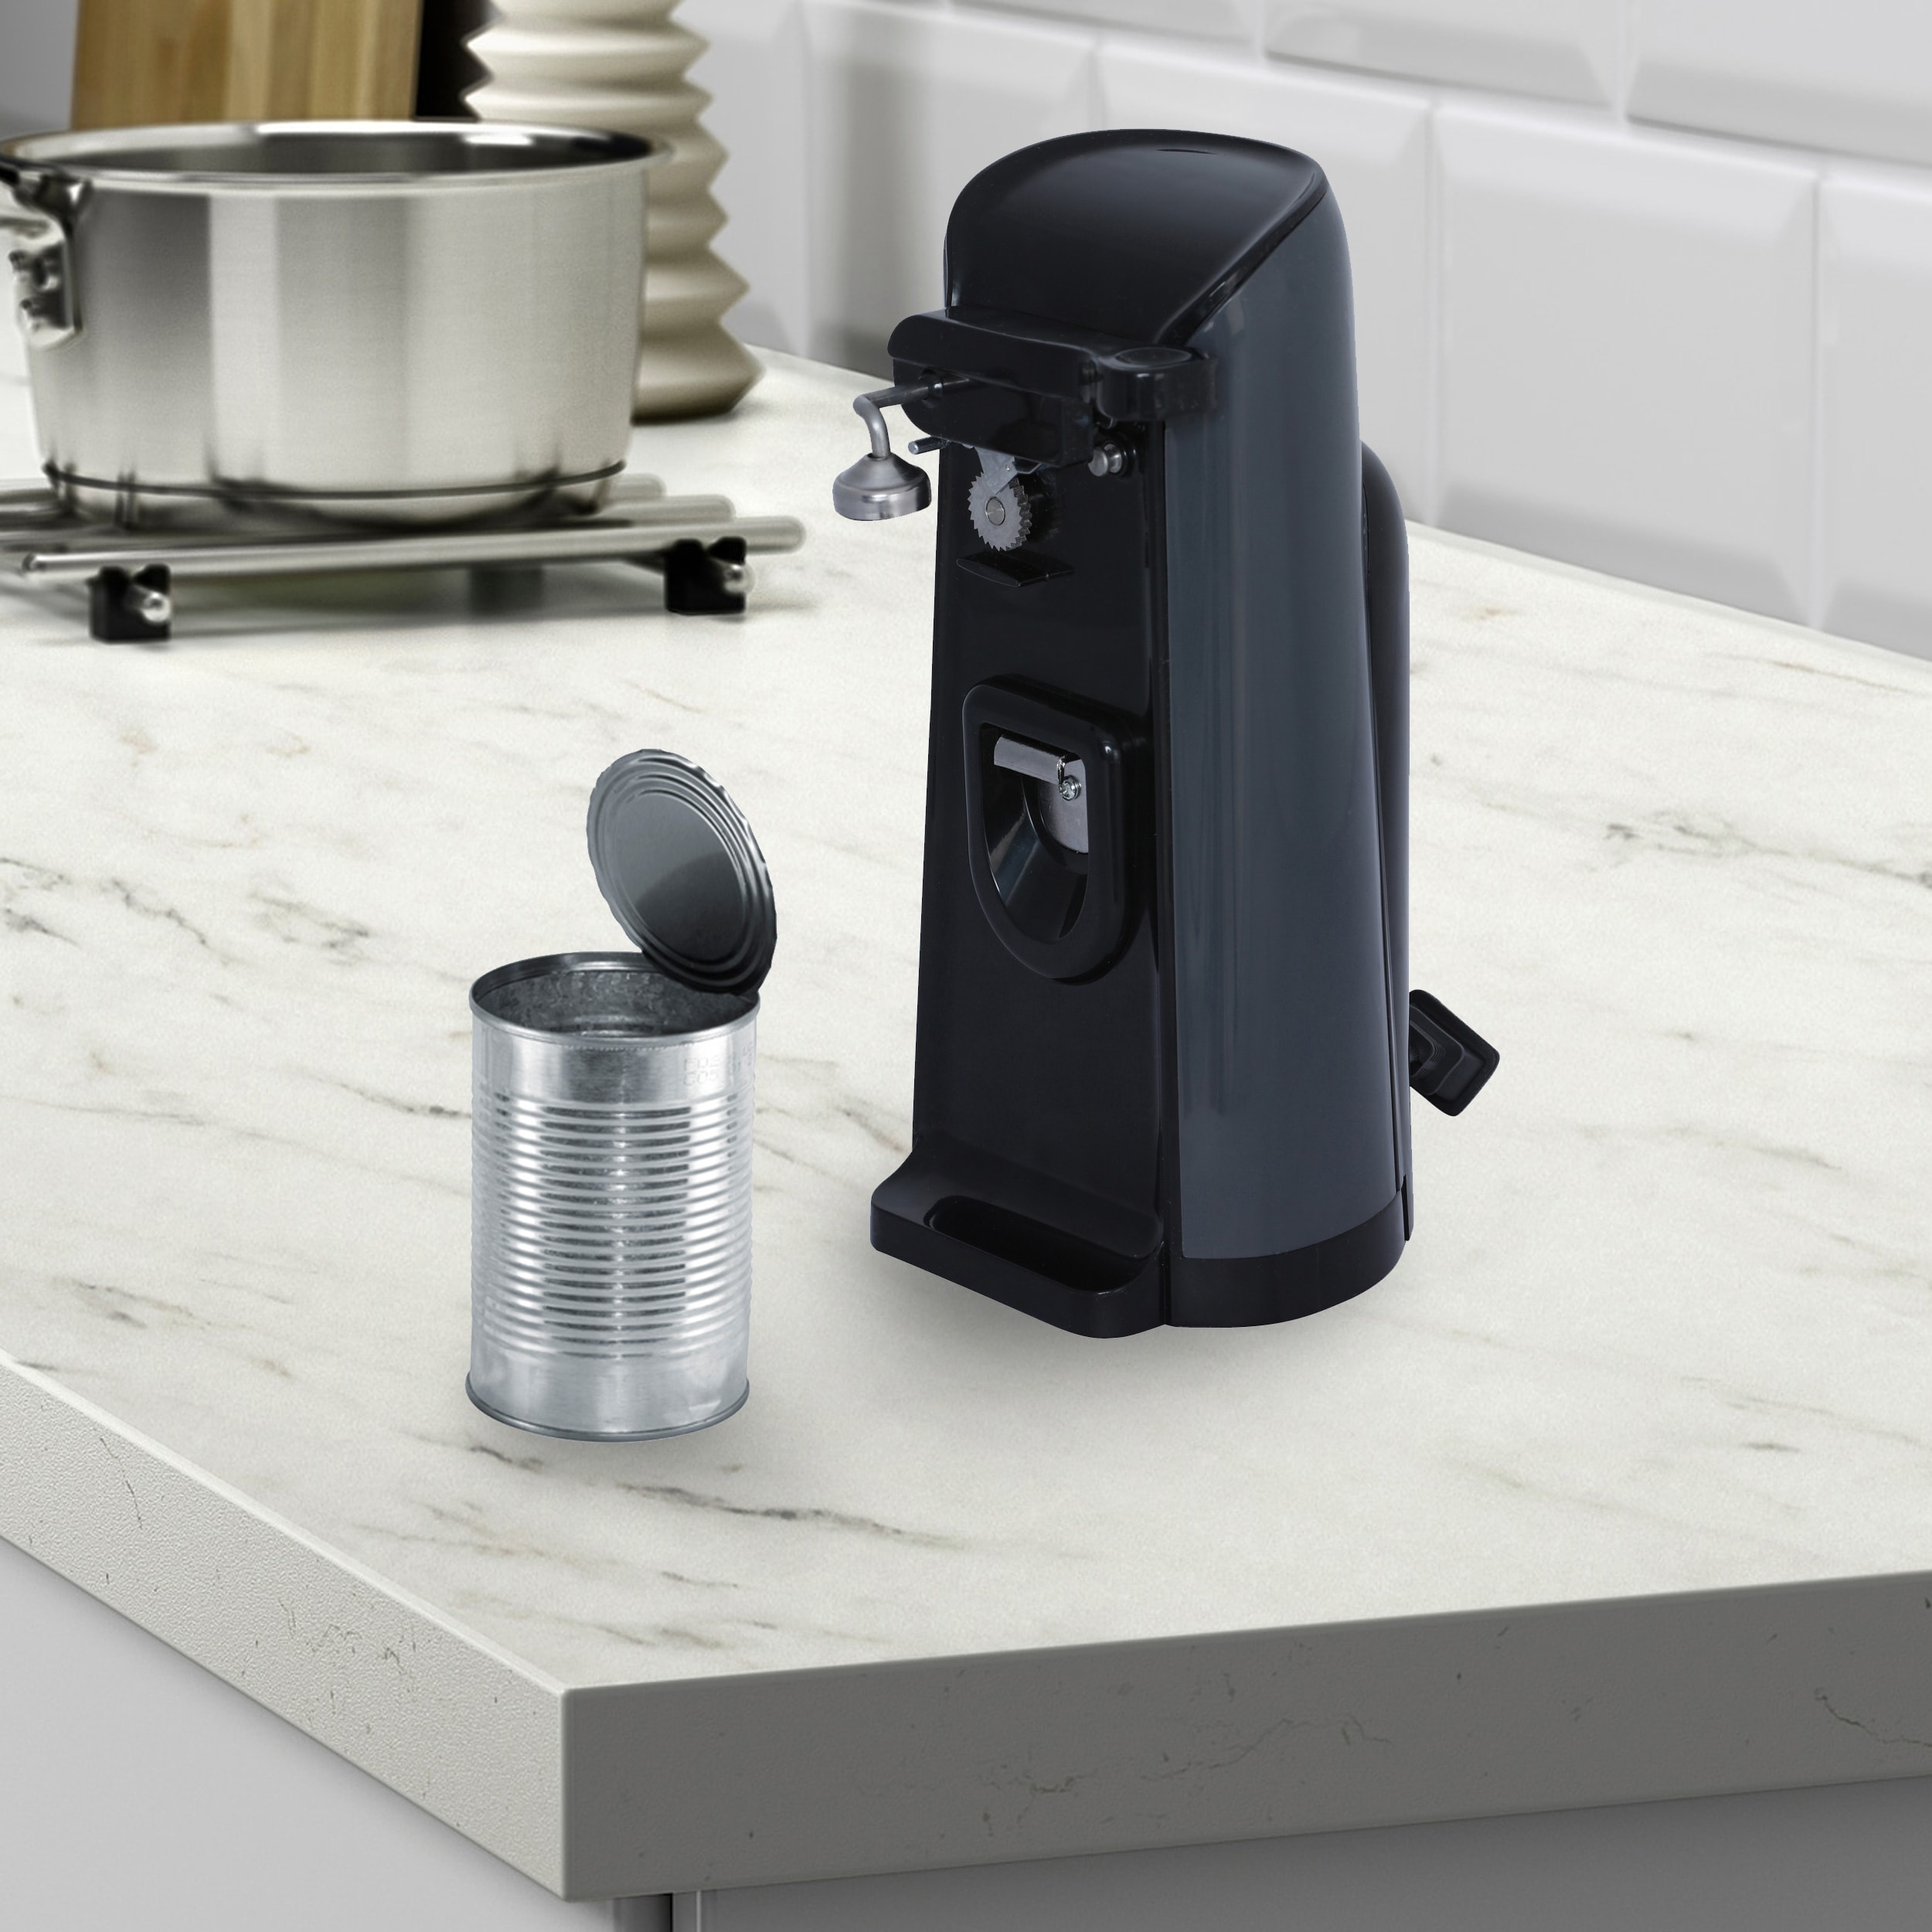 Extra Tall Electric Can Opener - On Sale - Bed Bath & Beyond - 32049730